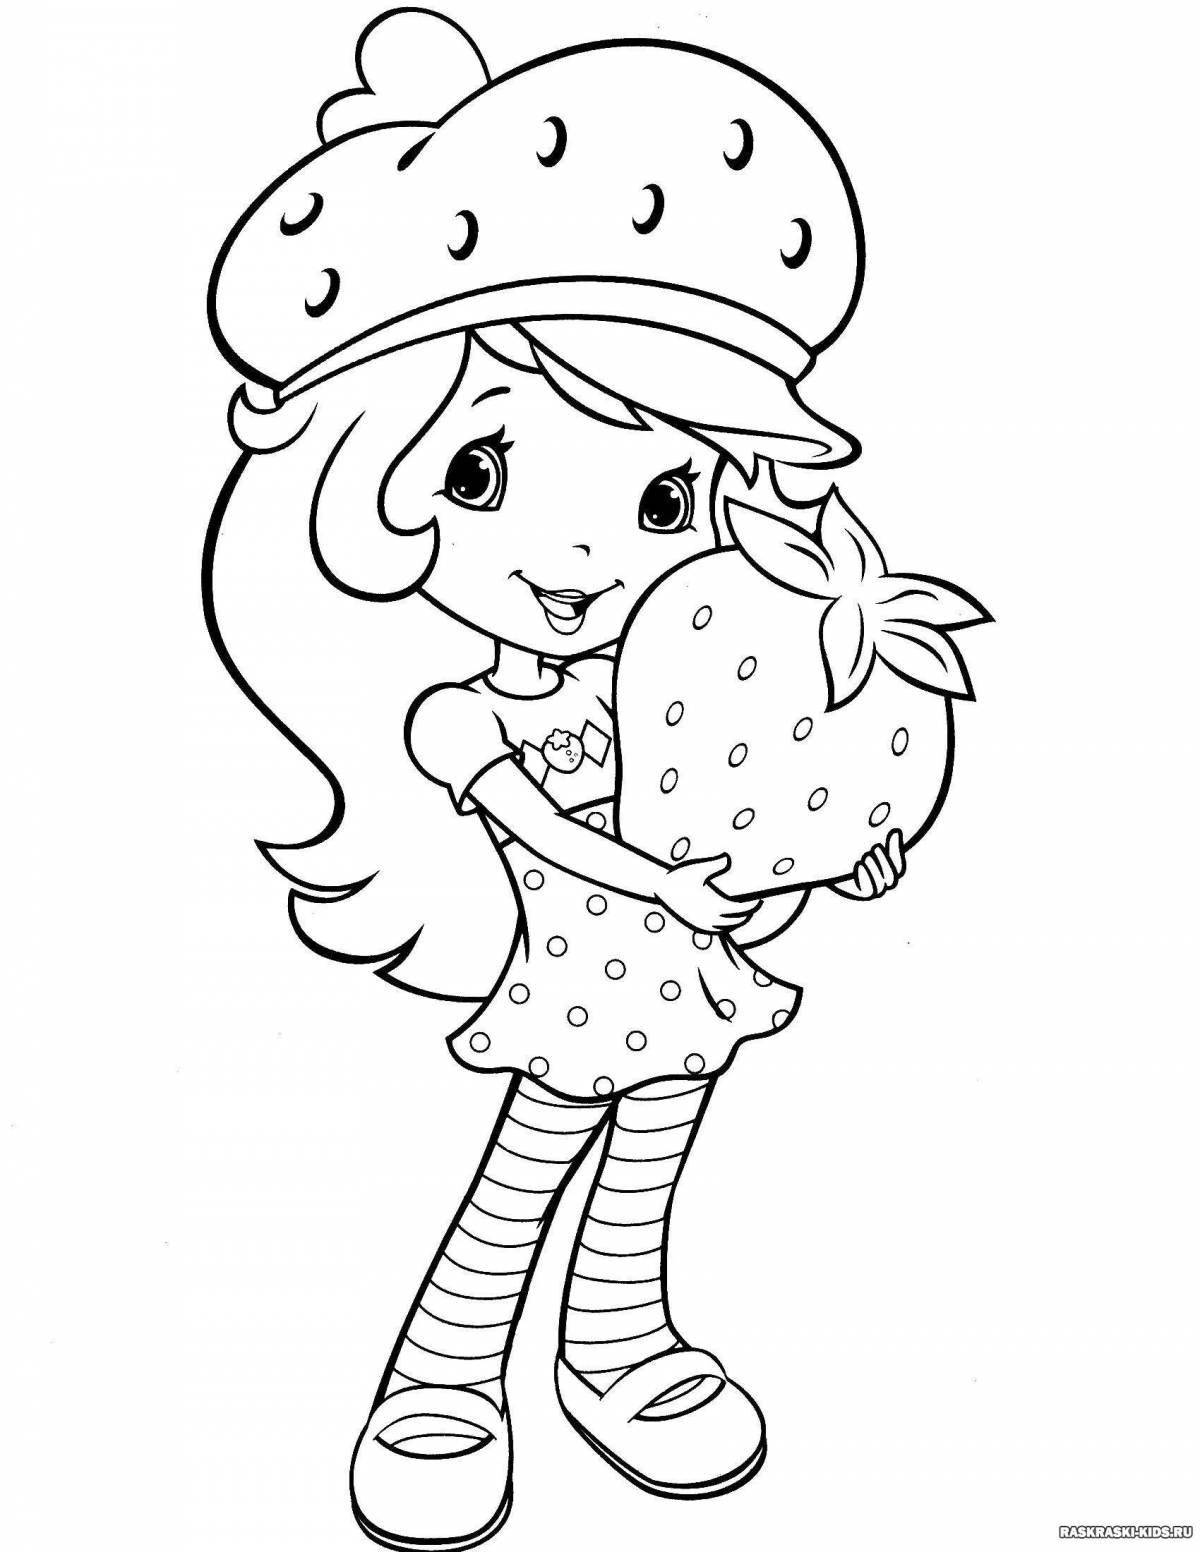 Delightful strawberry coloring book for girls